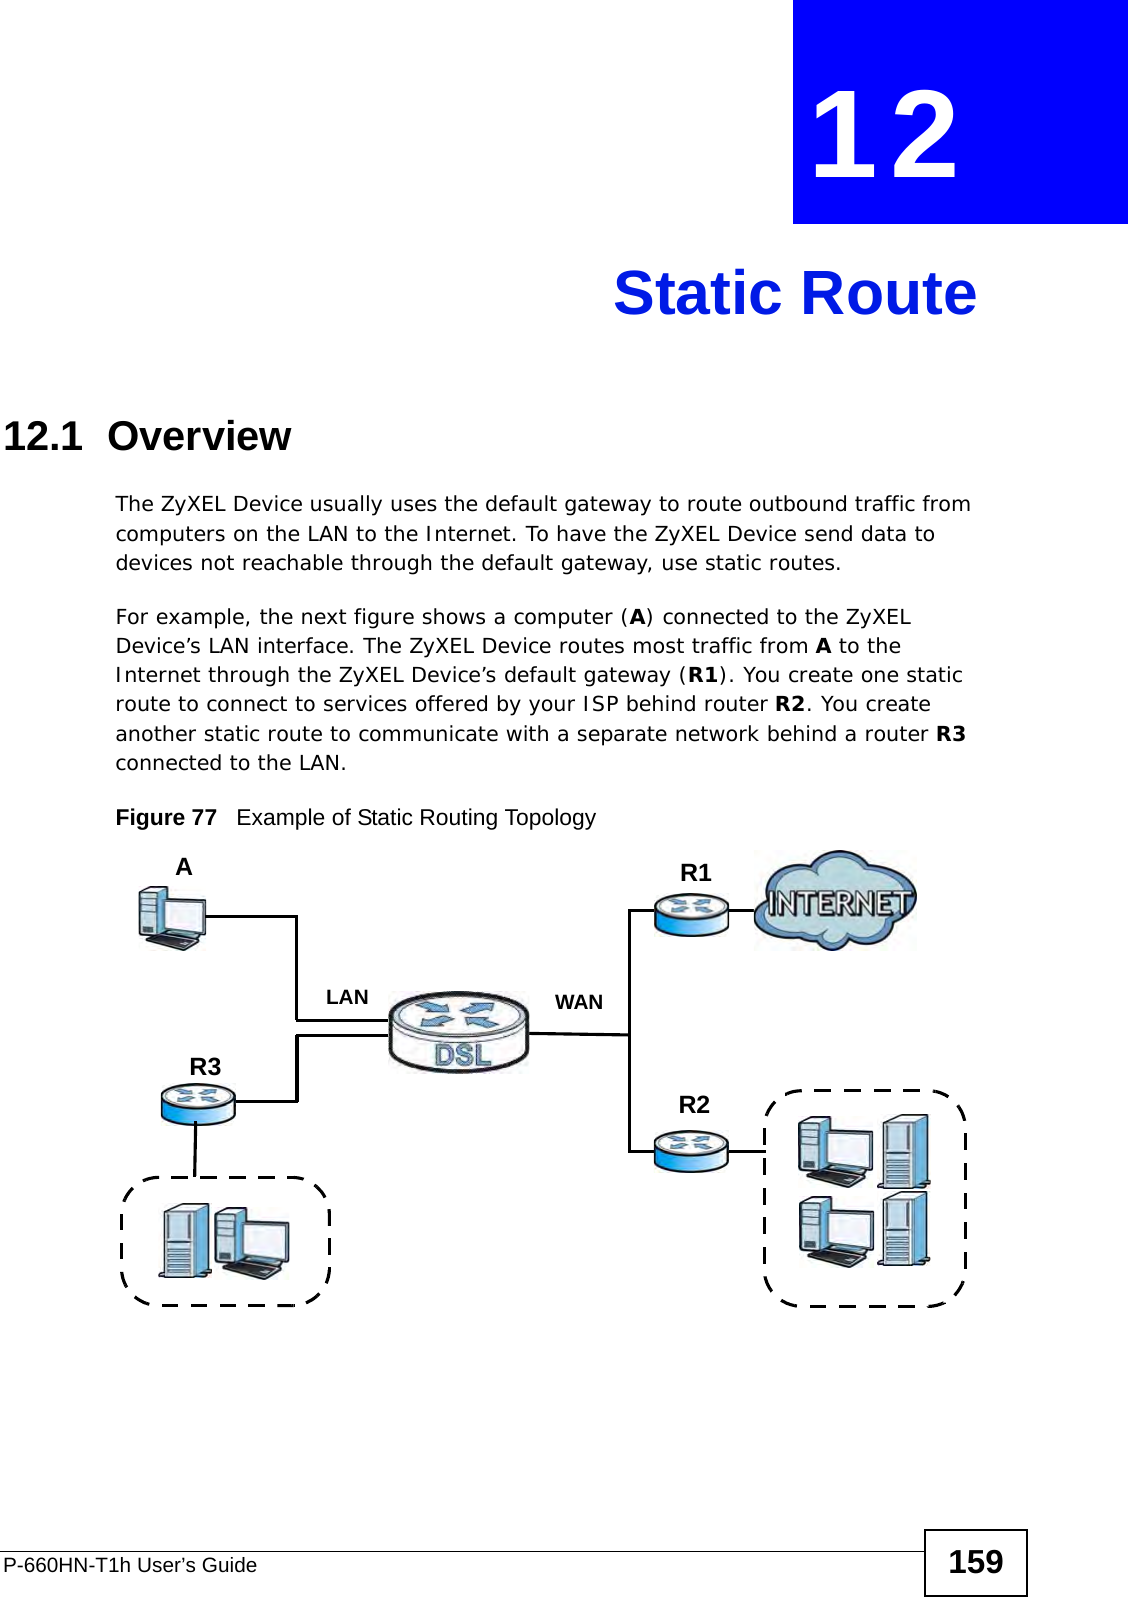 P-660HN-T1h User’s Guide 159CHAPTER  12 Static Route12.1  Overview The ZyXEL Device usually uses the default gateway to route outbound traffic from computers on the LAN to the Internet. To have the ZyXEL Device send data to devices not reachable through the default gateway, use static routes.For example, the next figure shows a computer (A) connected to the ZyXEL Device’s LAN interface. The ZyXEL Device routes most traffic from A to the Internet through the ZyXEL Device’s default gateway (R1). You create one static route to connect to services offered by your ISP behind router R2. You create another static route to communicate with a separate network behind a router R3 connected to the LAN.   Figure 77   Example of Static Routing TopologyWANR1R2AR3LAN